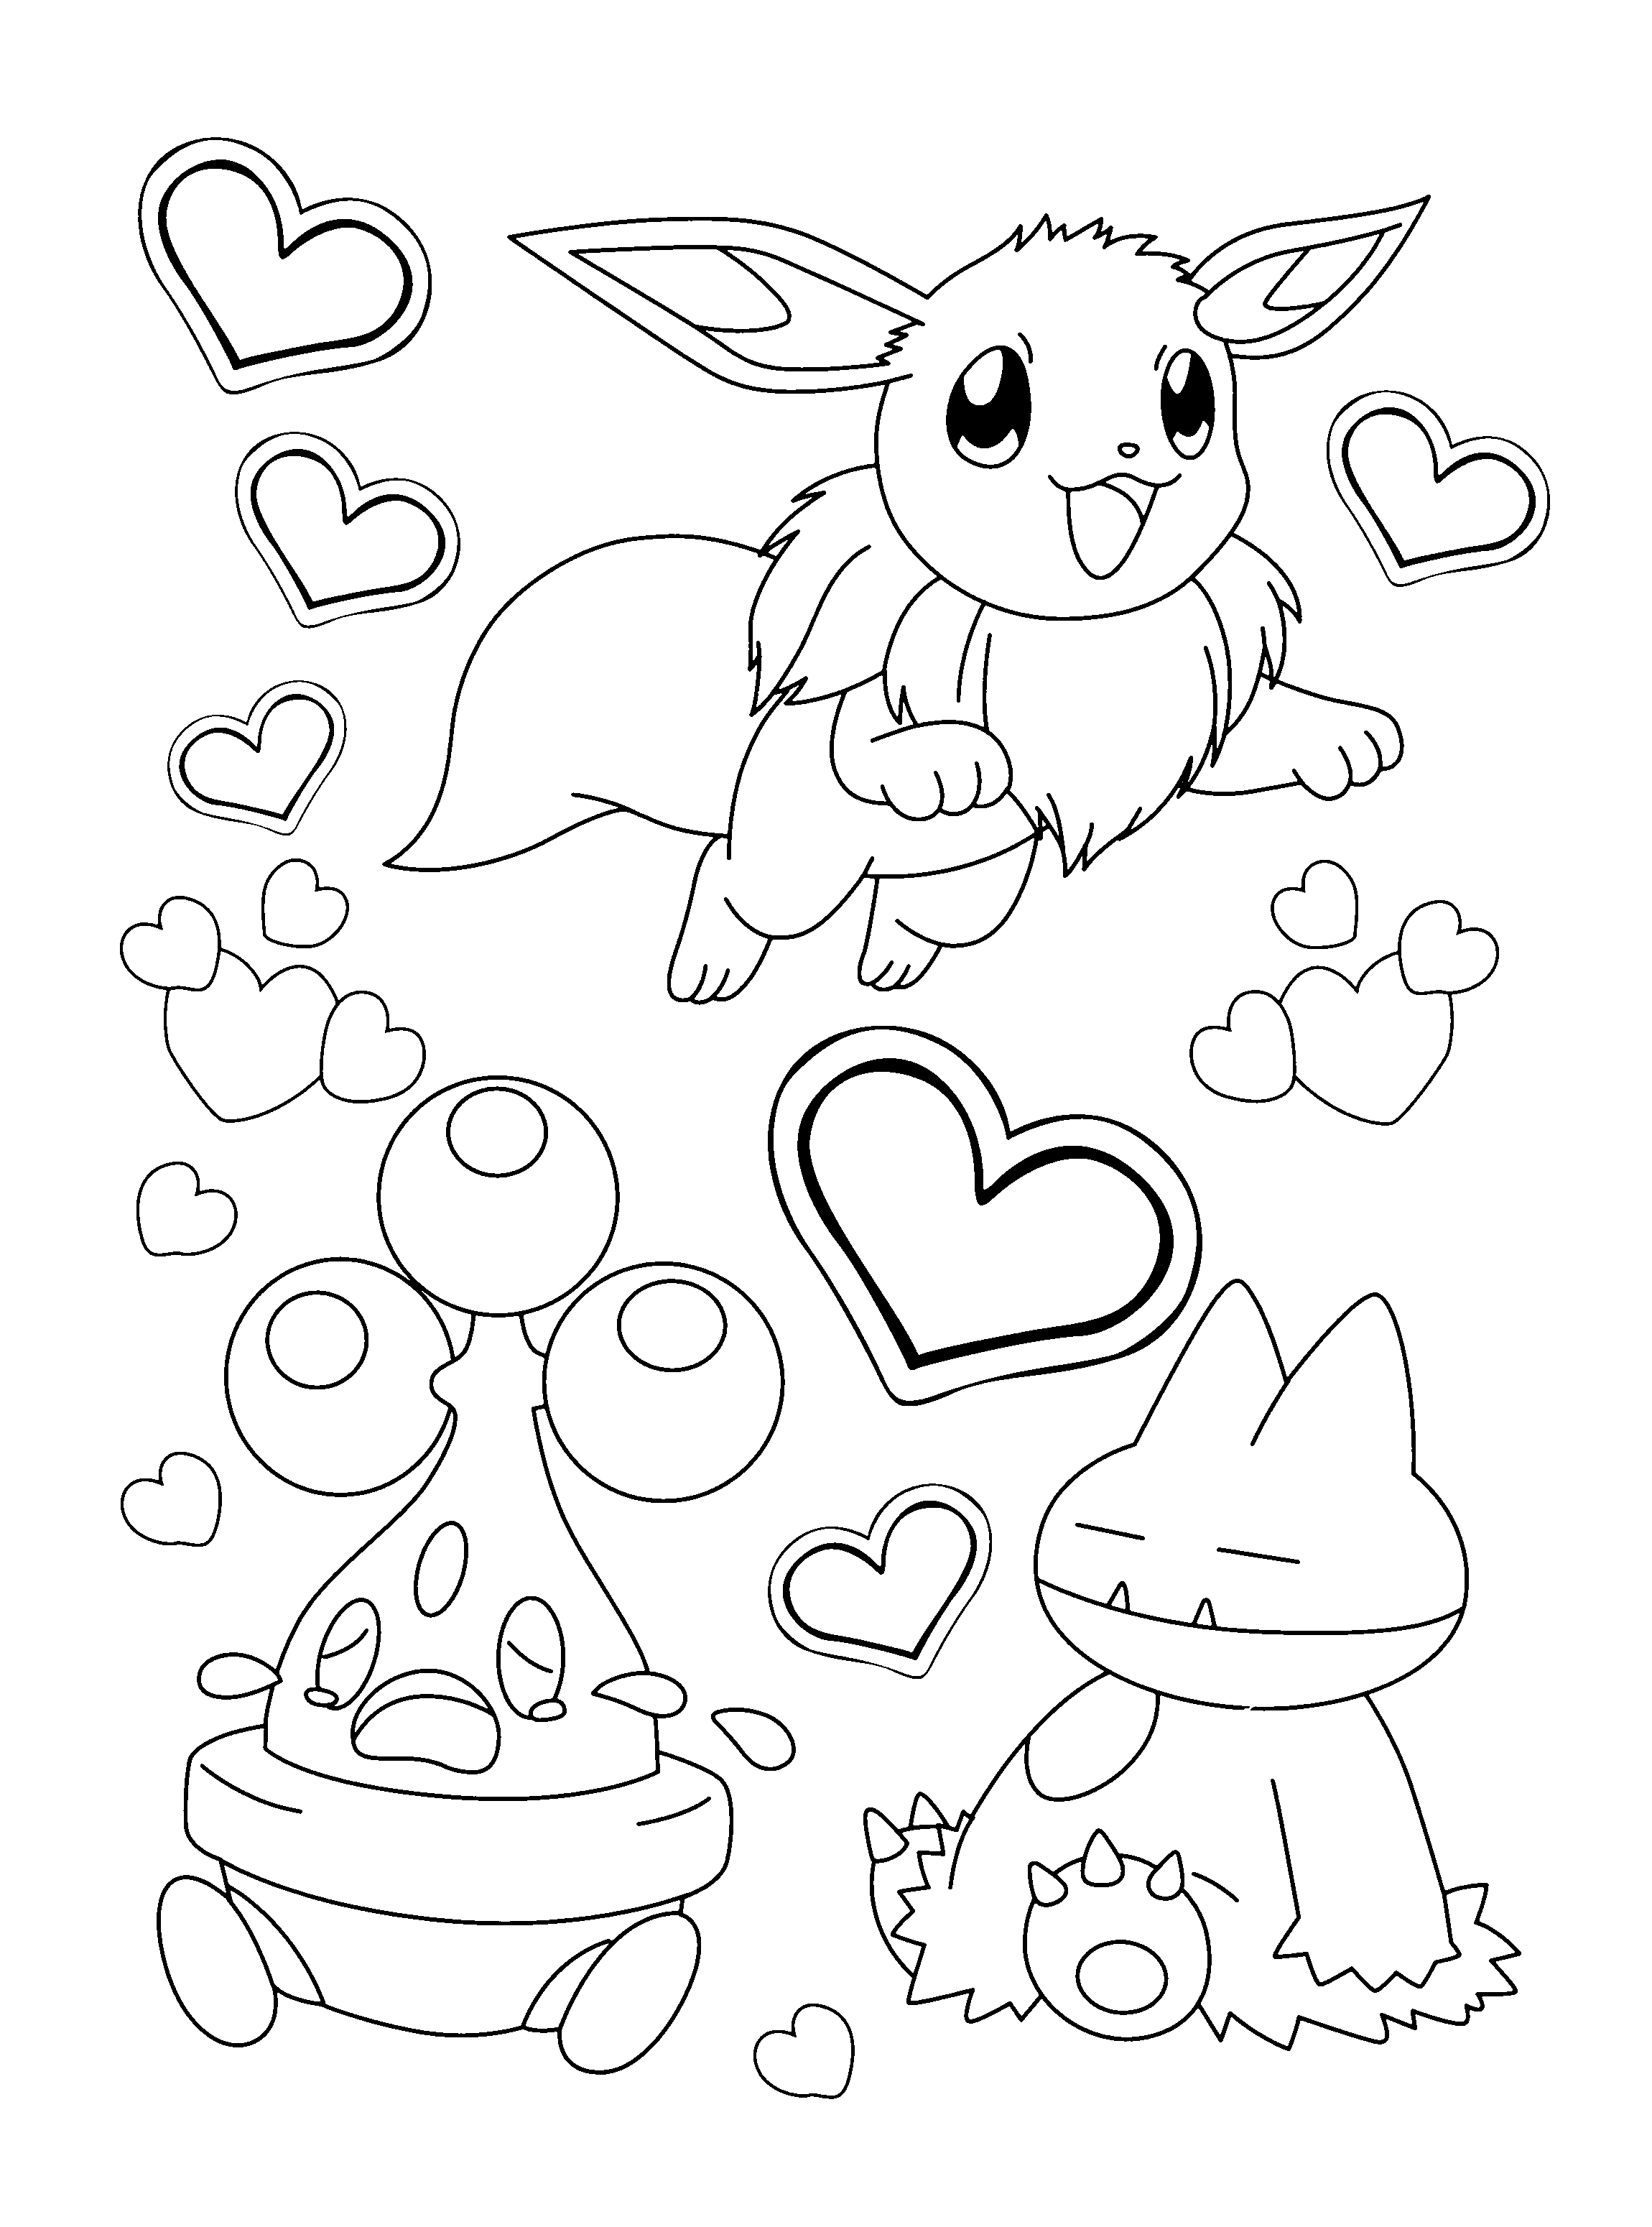 26 Free Printable Eevee Pokemon Coloring Pages